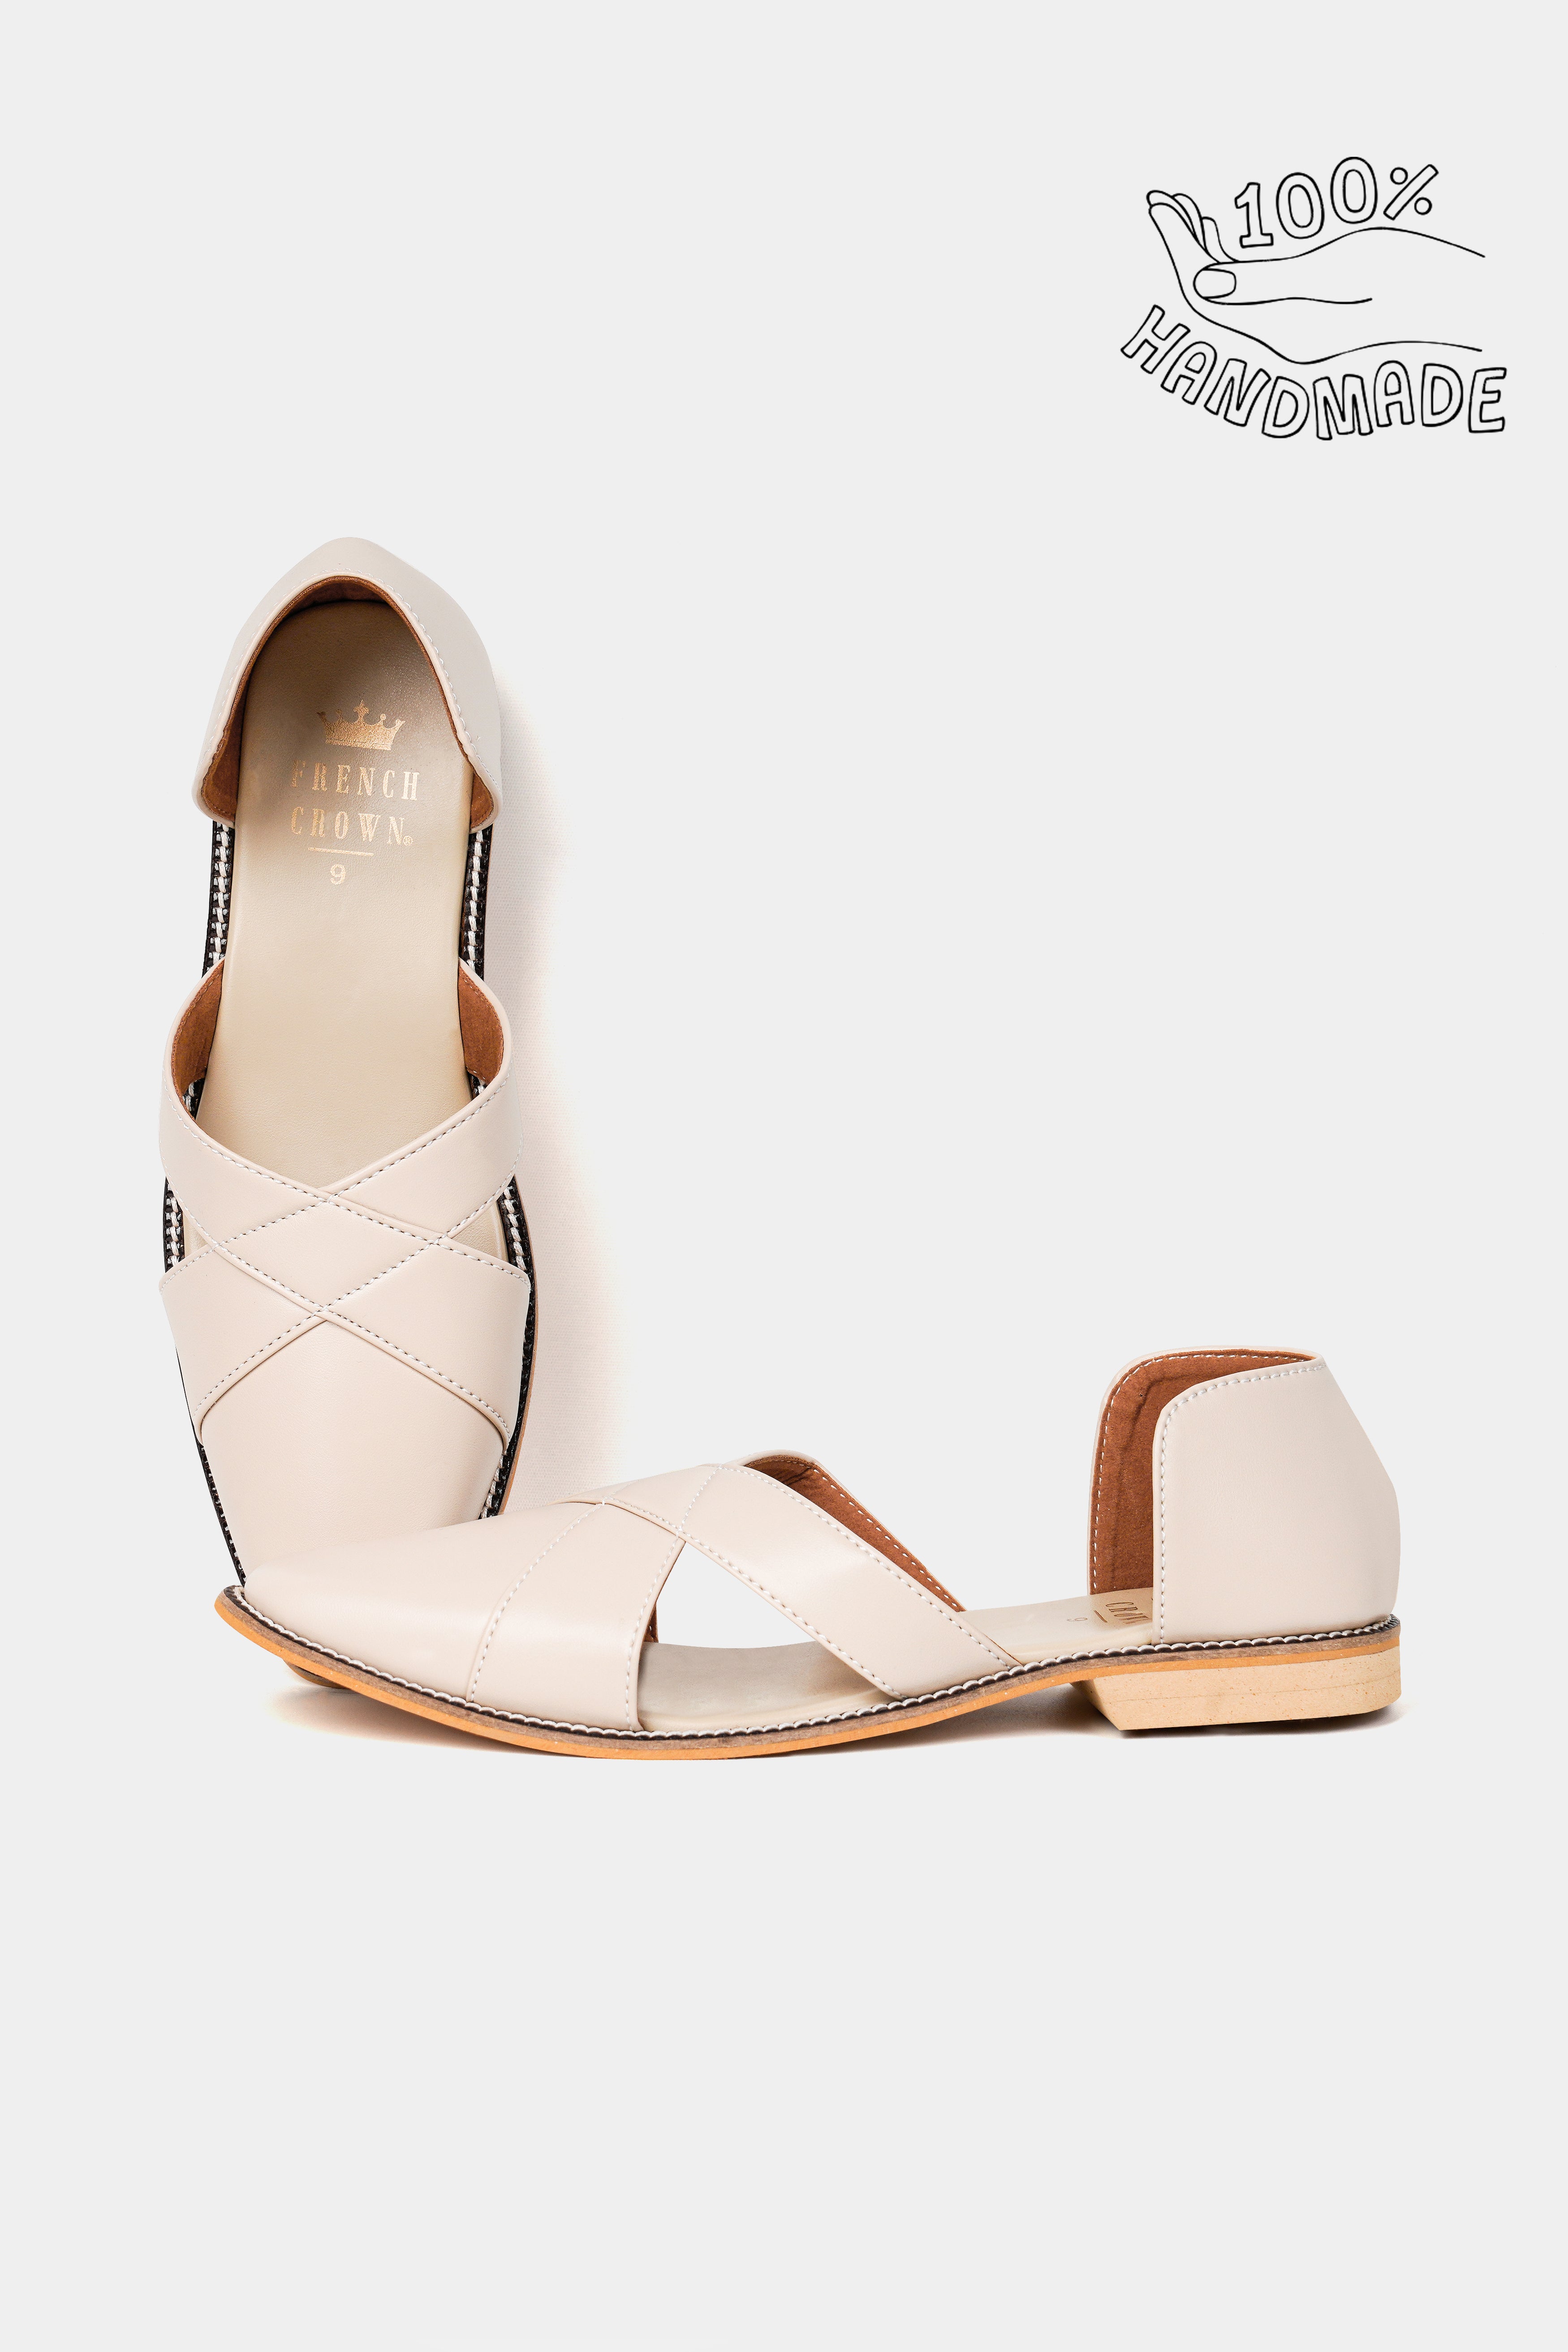 Cream Classic Criss Cross Strapped Vegan Leather Hand Stitched Pathanis Sandal FT137-6, FT137-7, FT137-8, FT137-9, FT137-10, FT137-11